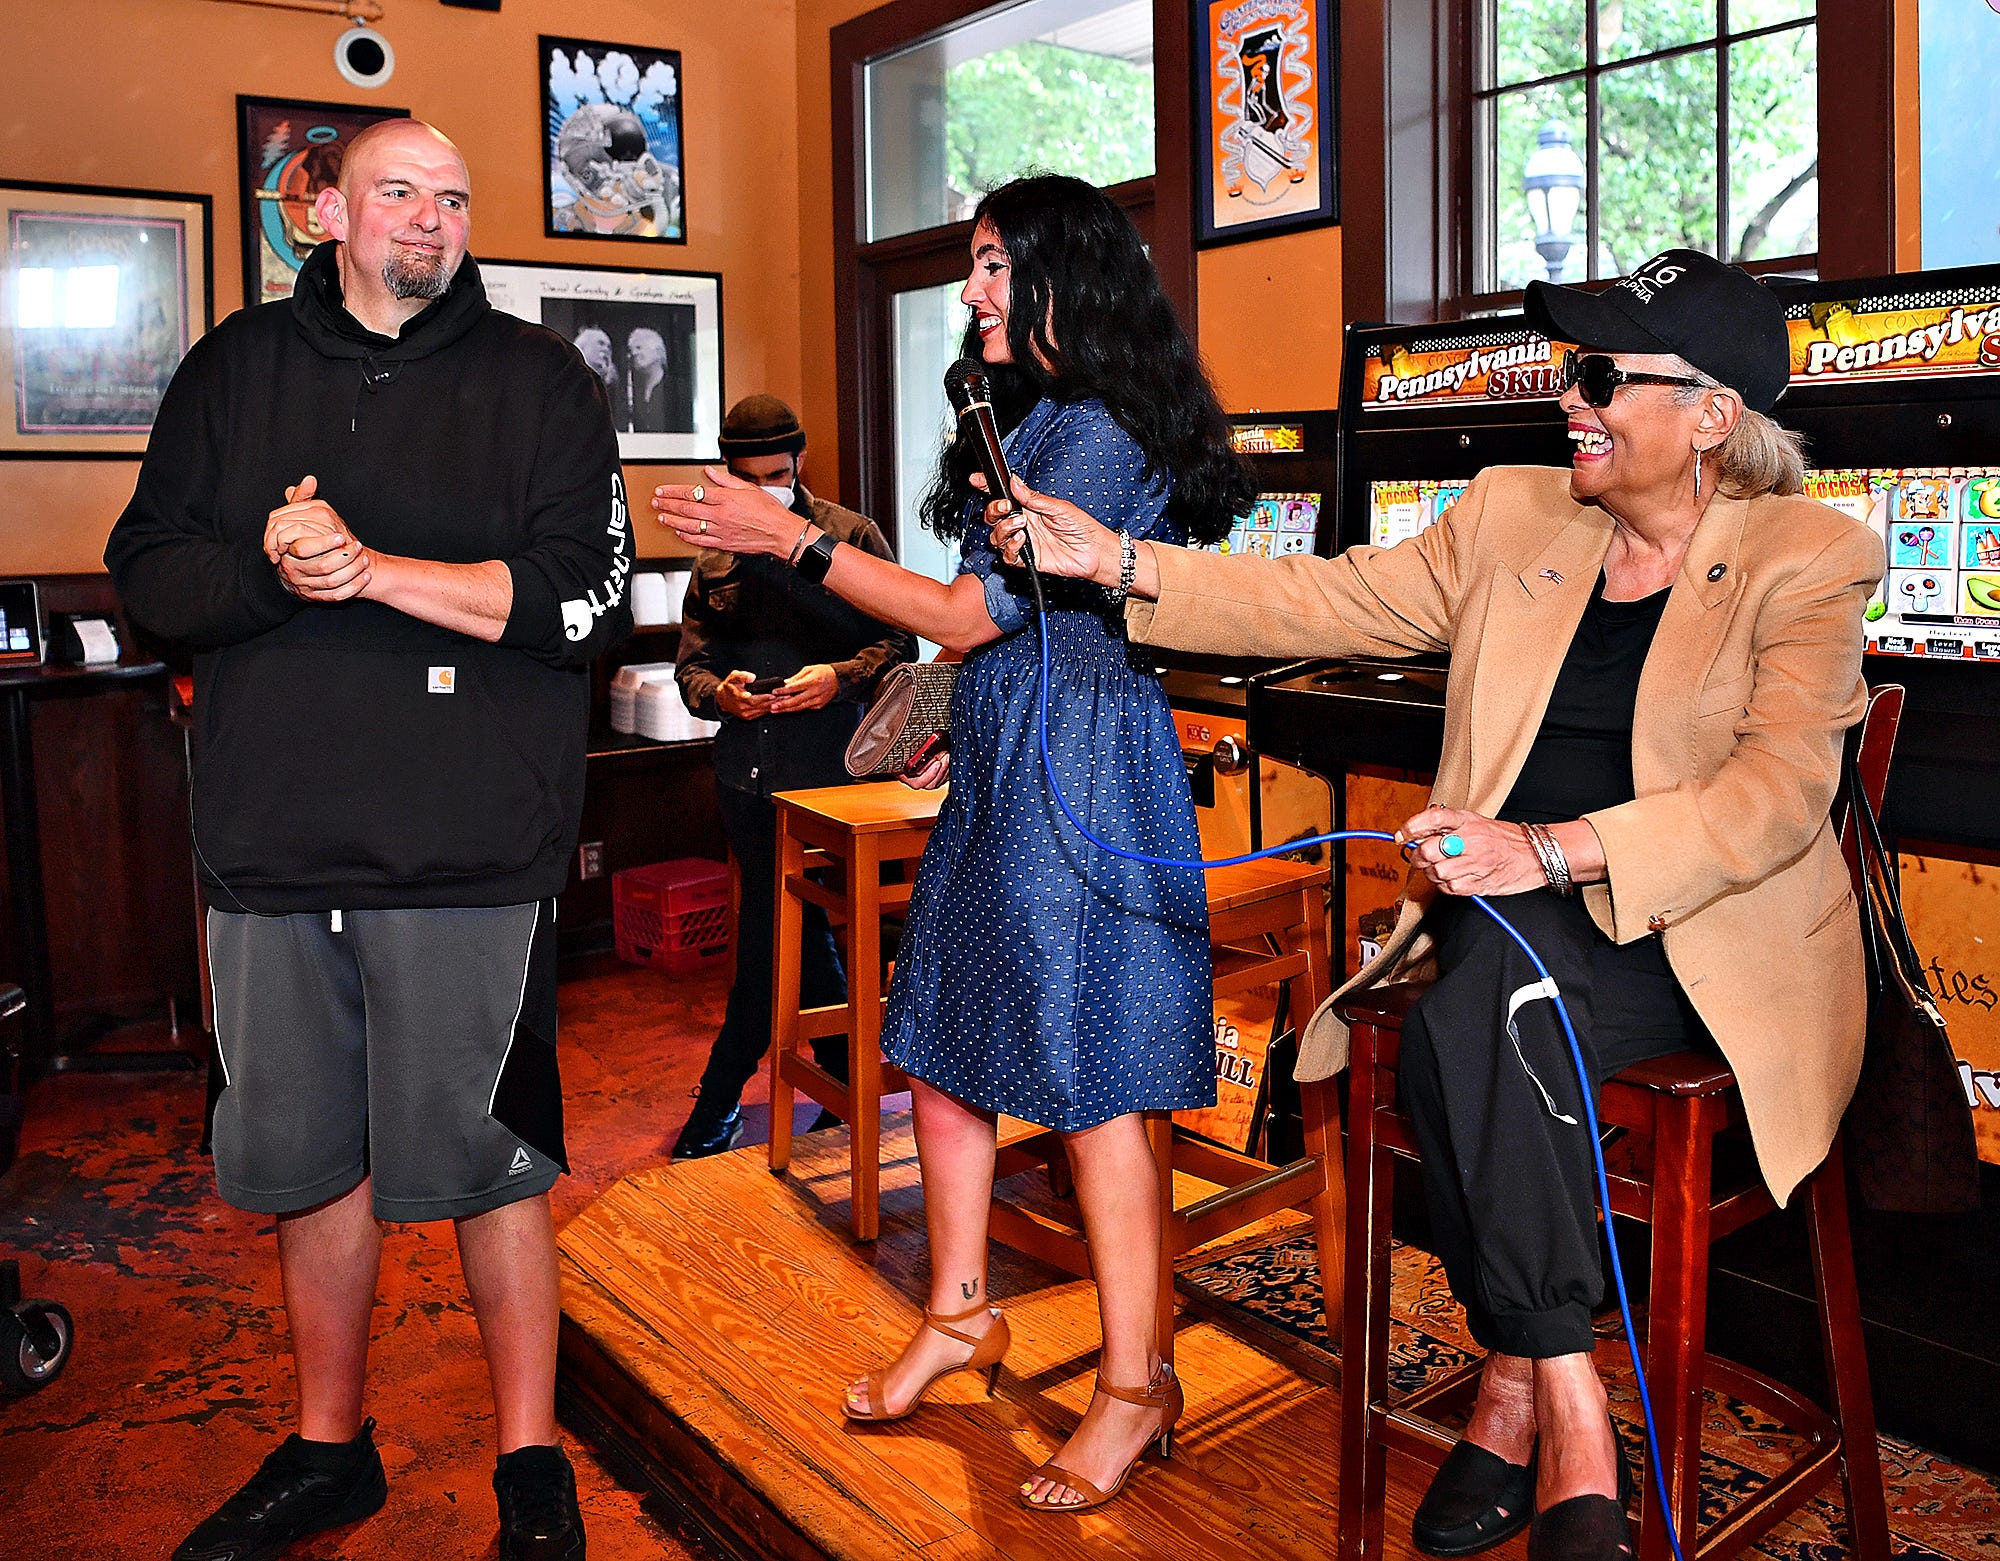 Salome Johnson, right, of Hallam Borough, and Gisele Fetterman share a laugh as Johnson introduces U.S. Senate candidate Lt. Gov. John Fetterman during a campaign stop at Holy Hound Taproom in York City, Thursday, May 12, 2022. Dawn J. Sagert photo